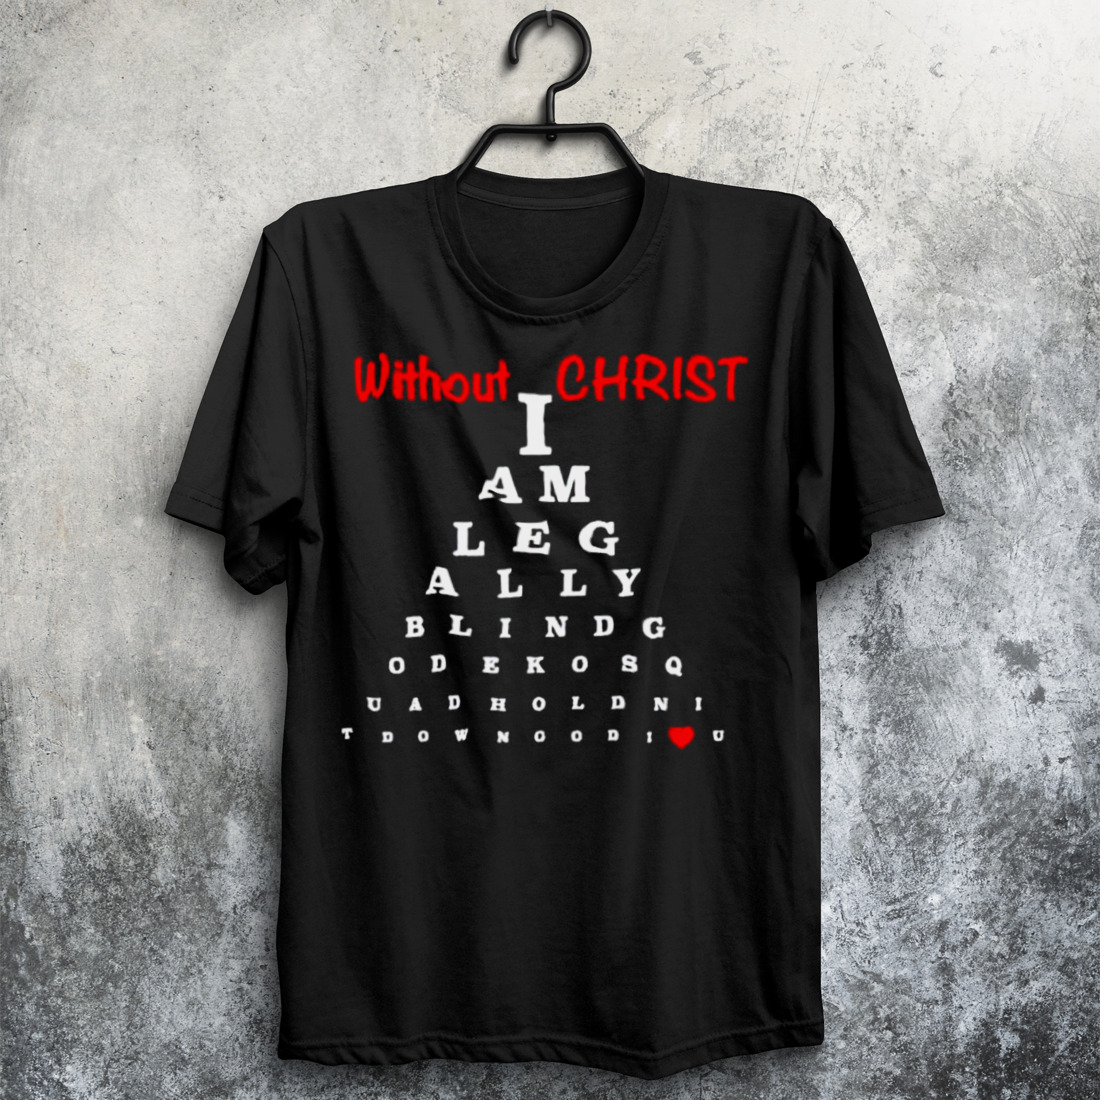 Without Christ Legally Blind shirt